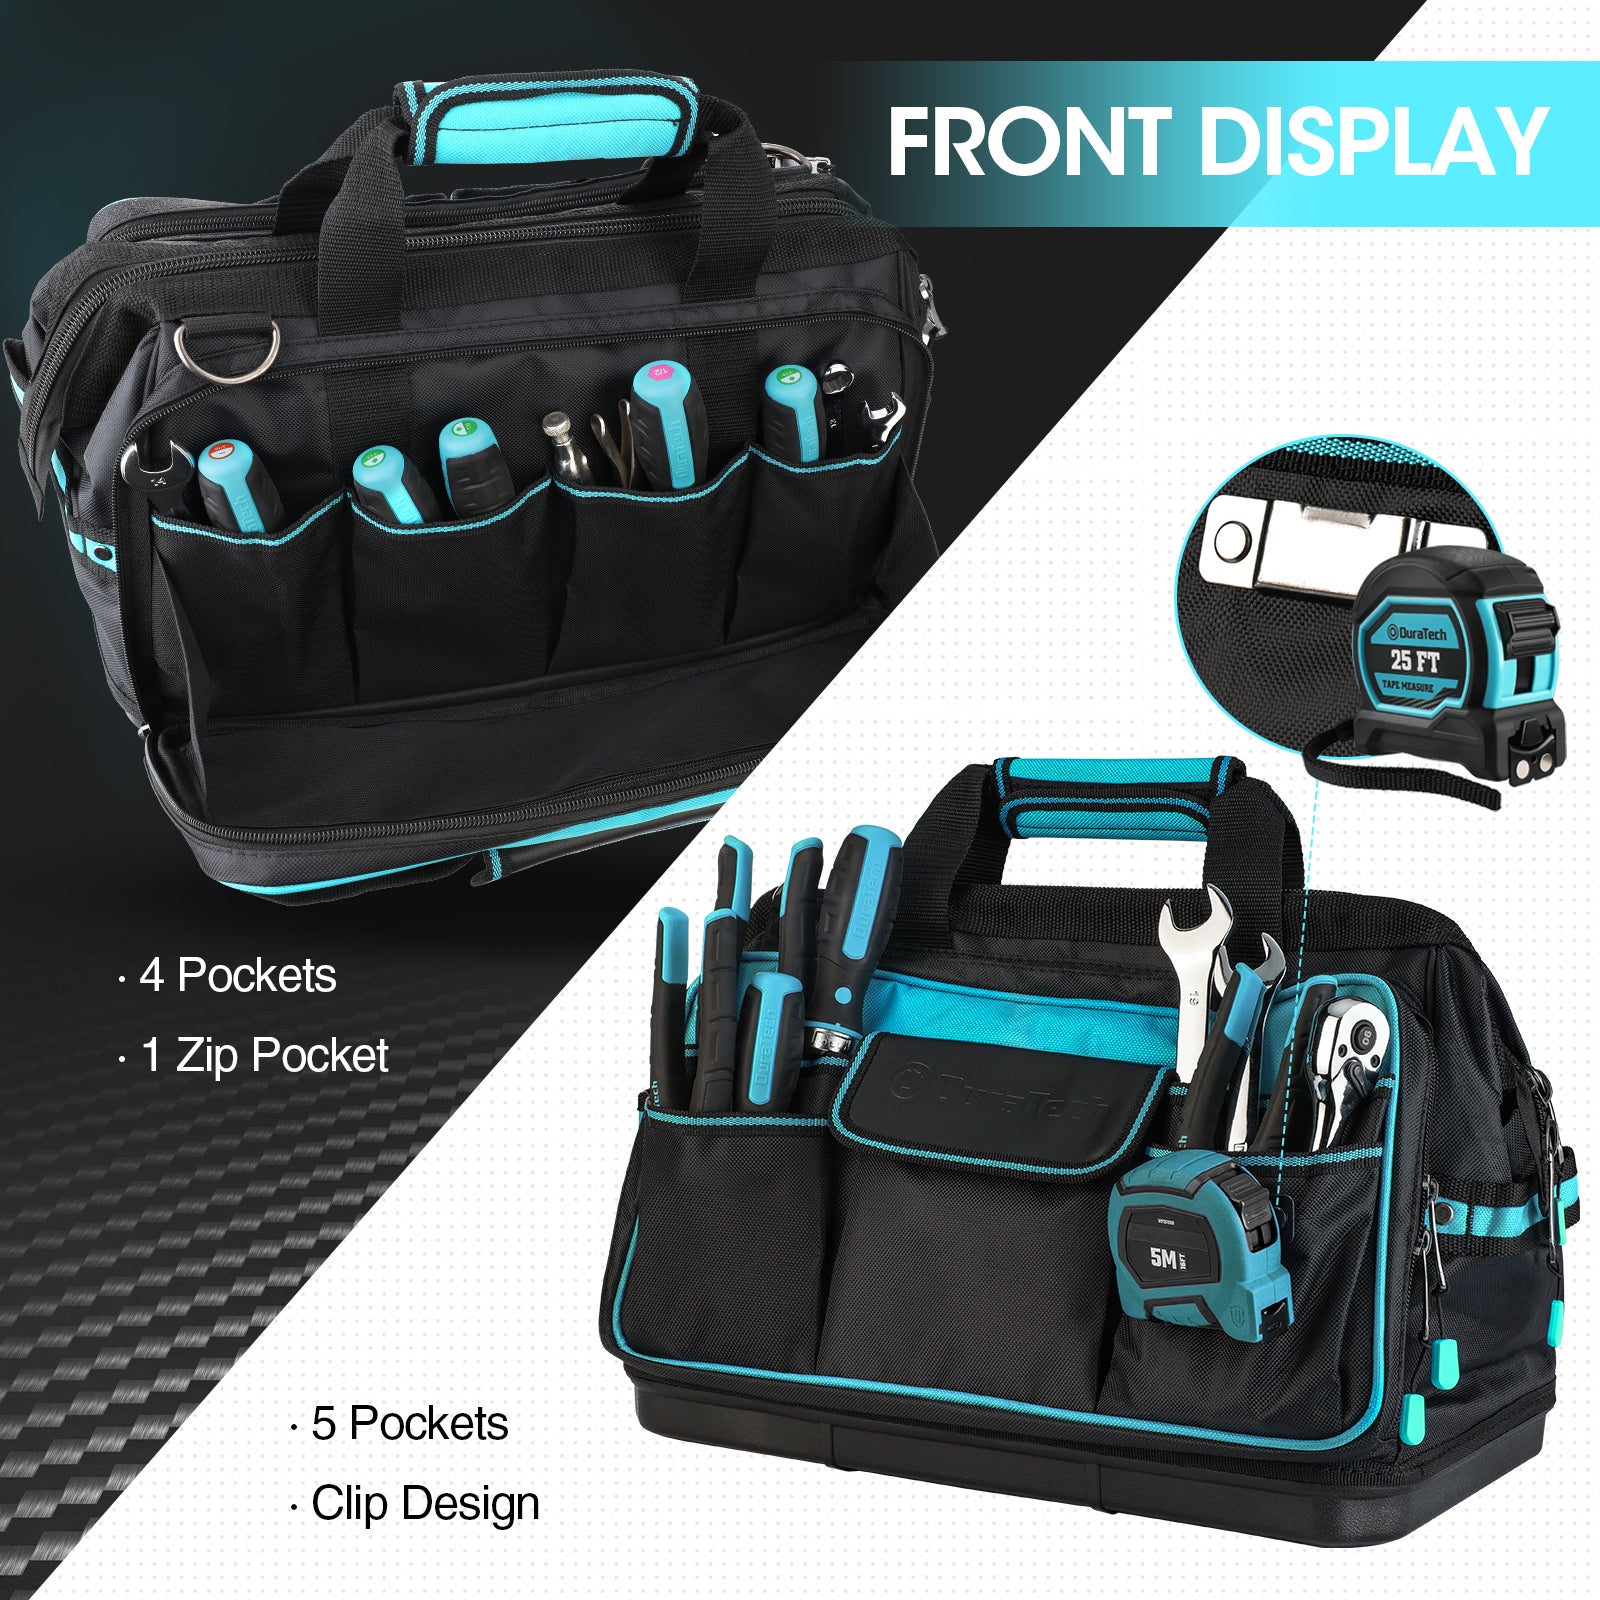 DURATECH 17" Wide Mouth Tool Bag